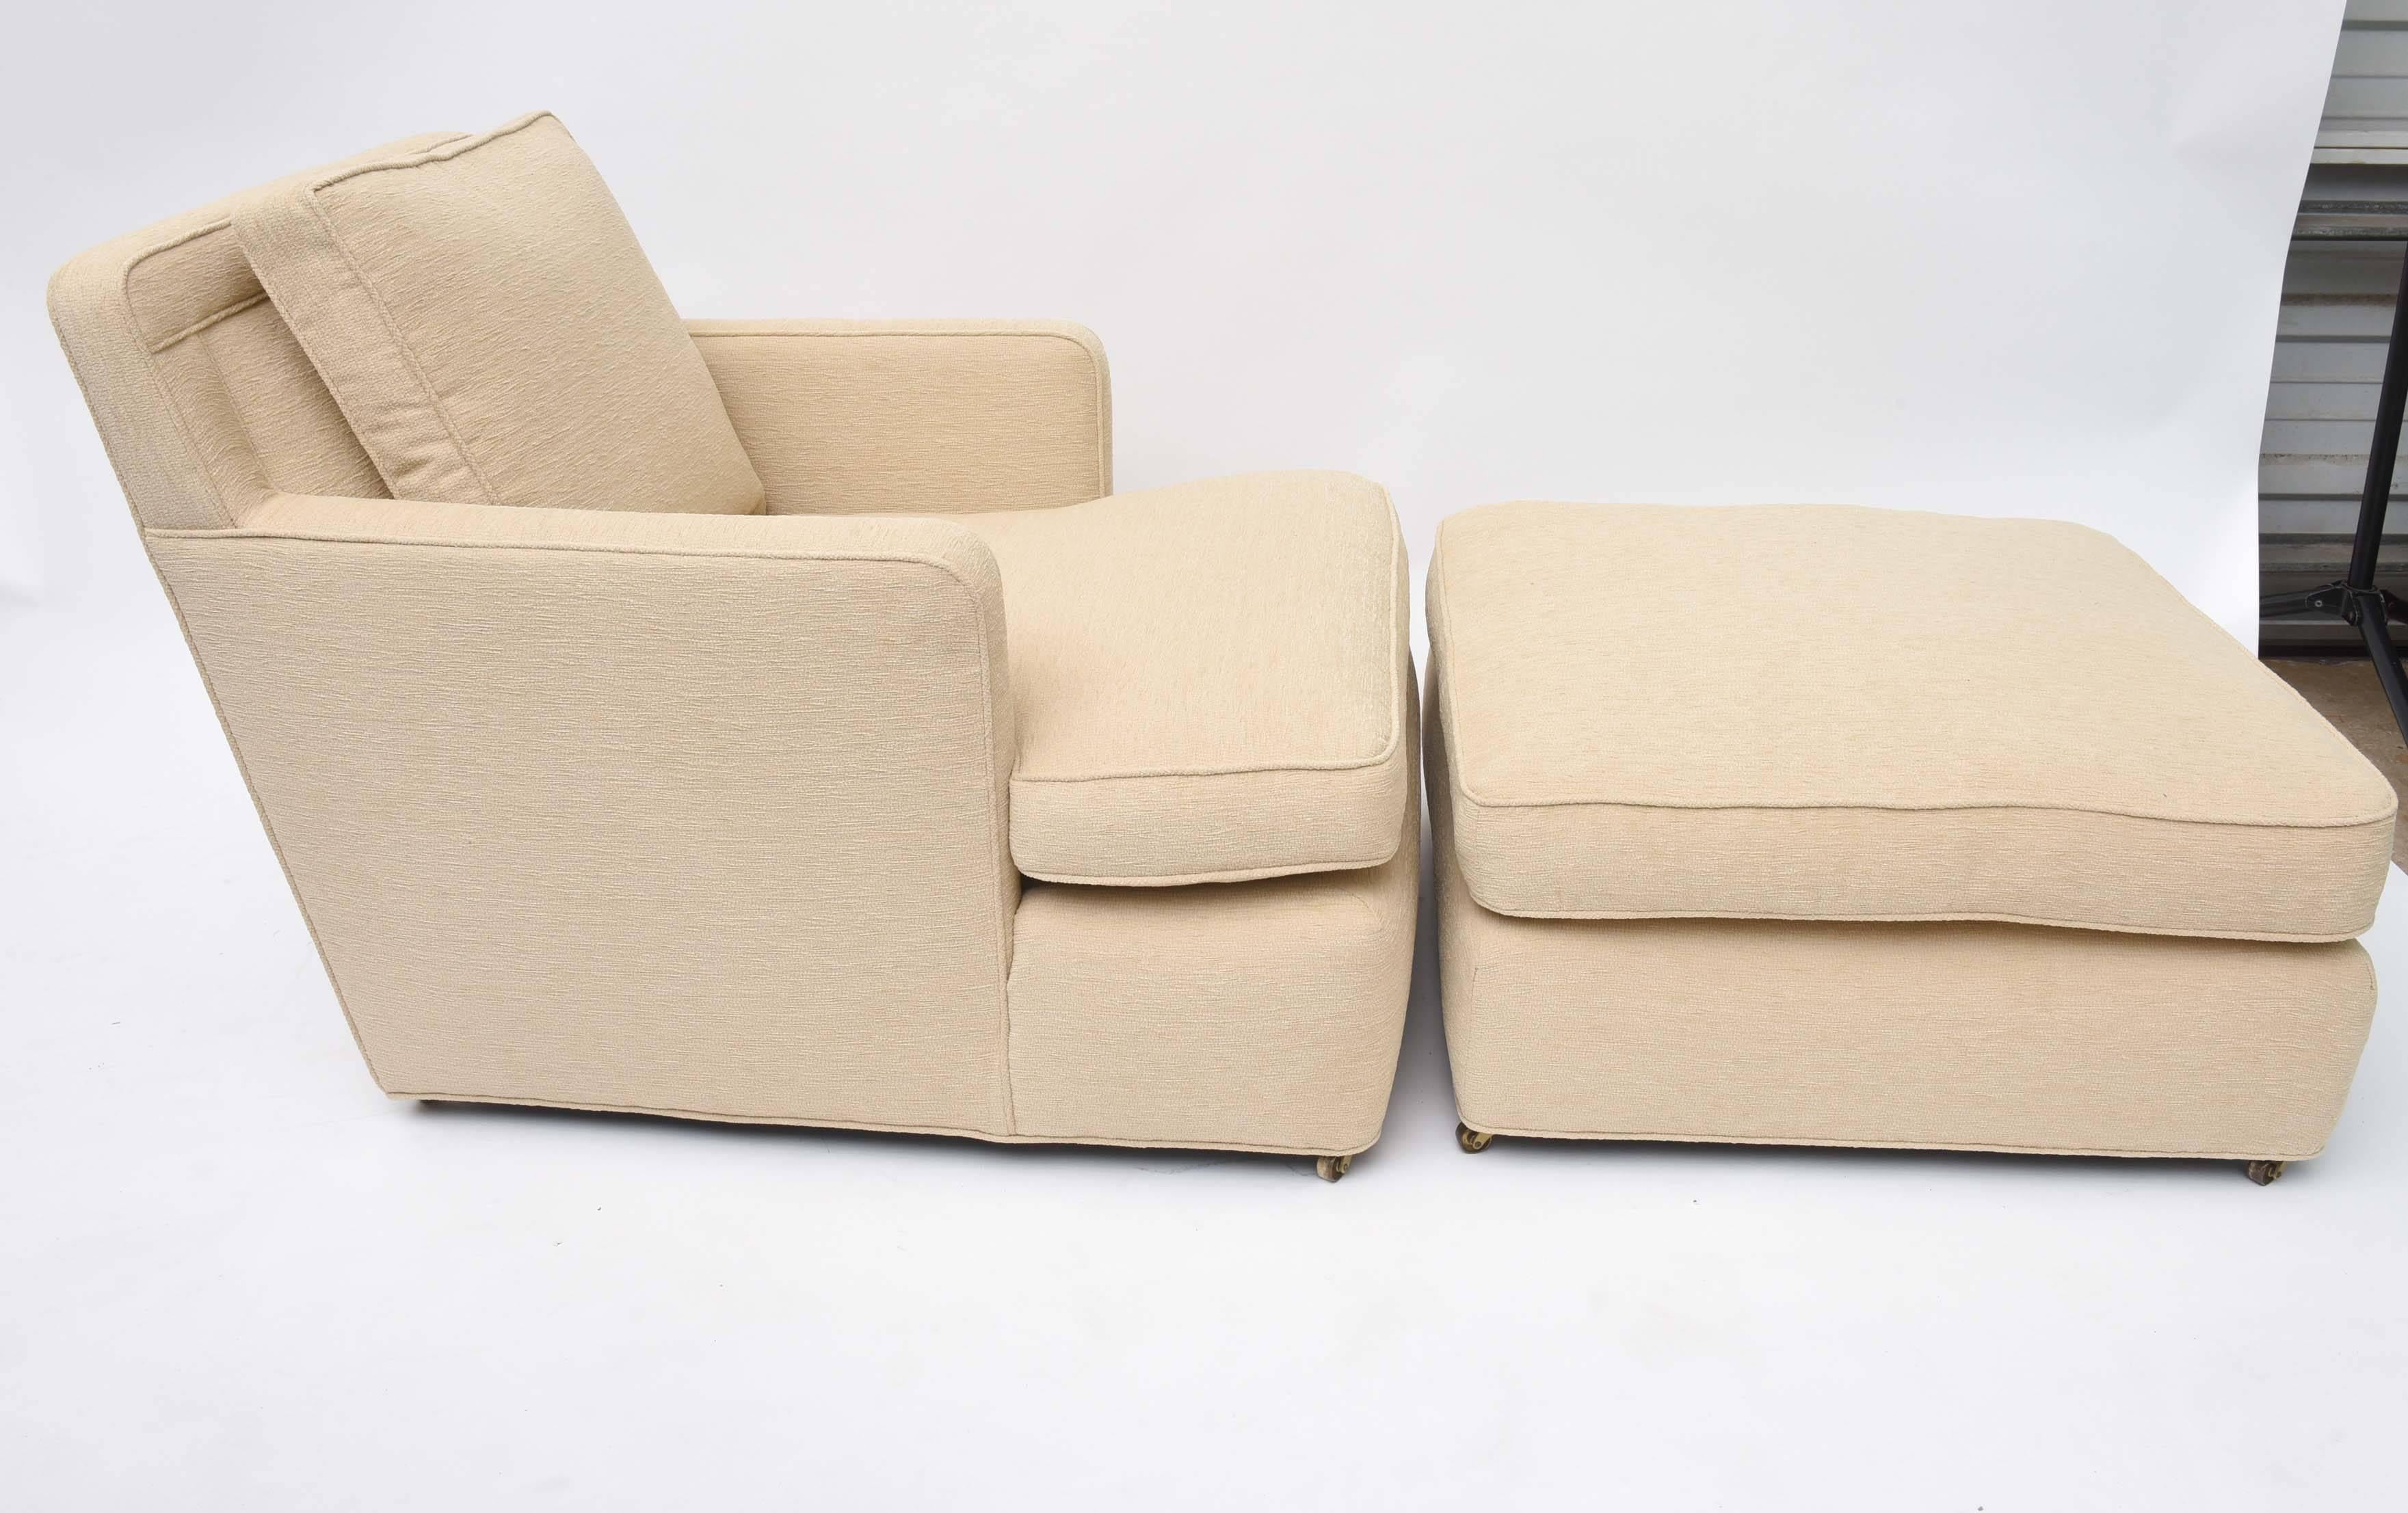 An oversized, comfortable lounge chair and ottoman.
Manufactured by Dunbar.